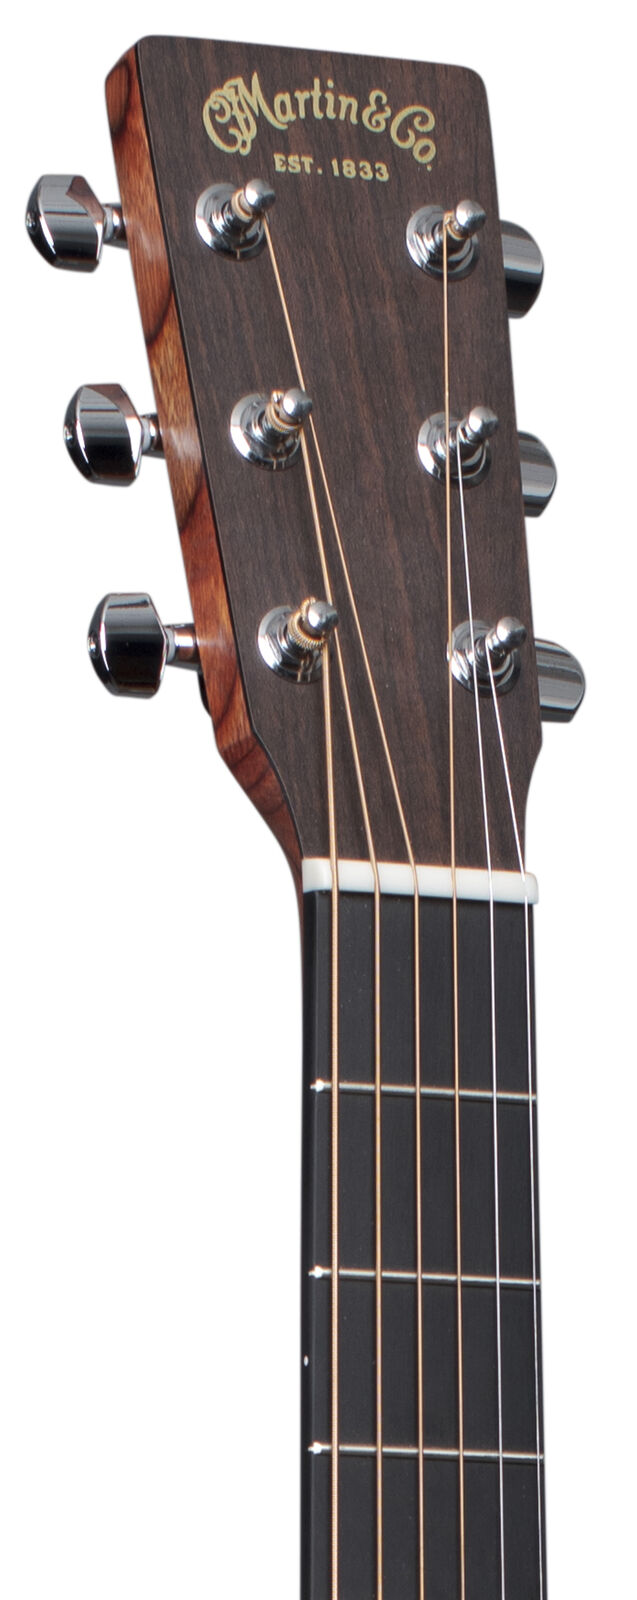 MARTIN ELECTROACOUSTIC GUITAR STEEL STRINGS 0X1E-01 WITH CASE